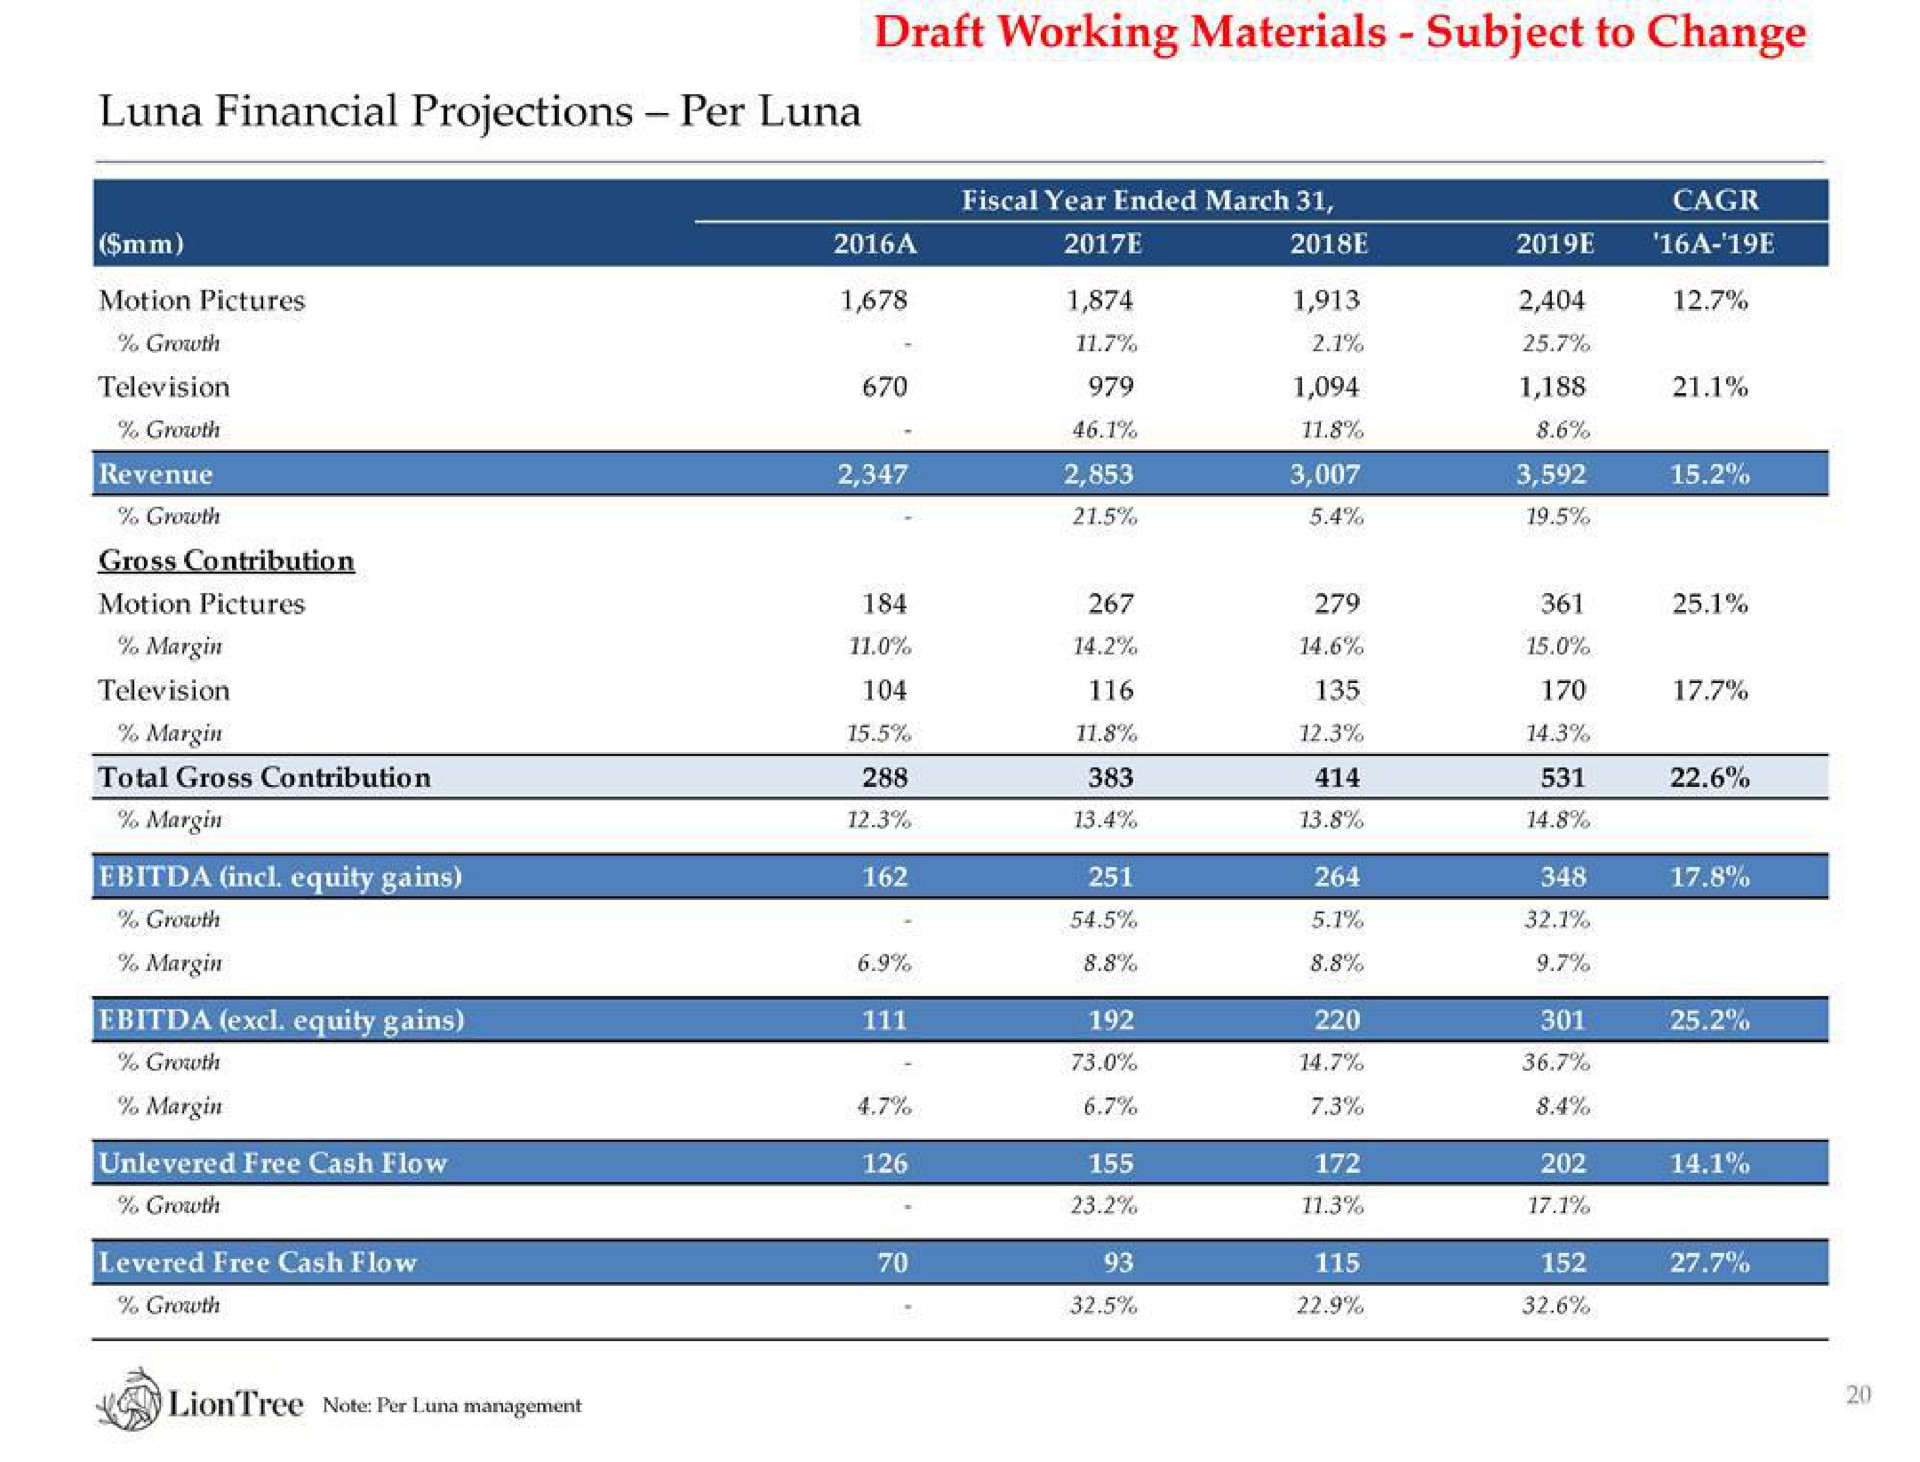 luna financial projections per luna draft working materials subject to change | LionTree